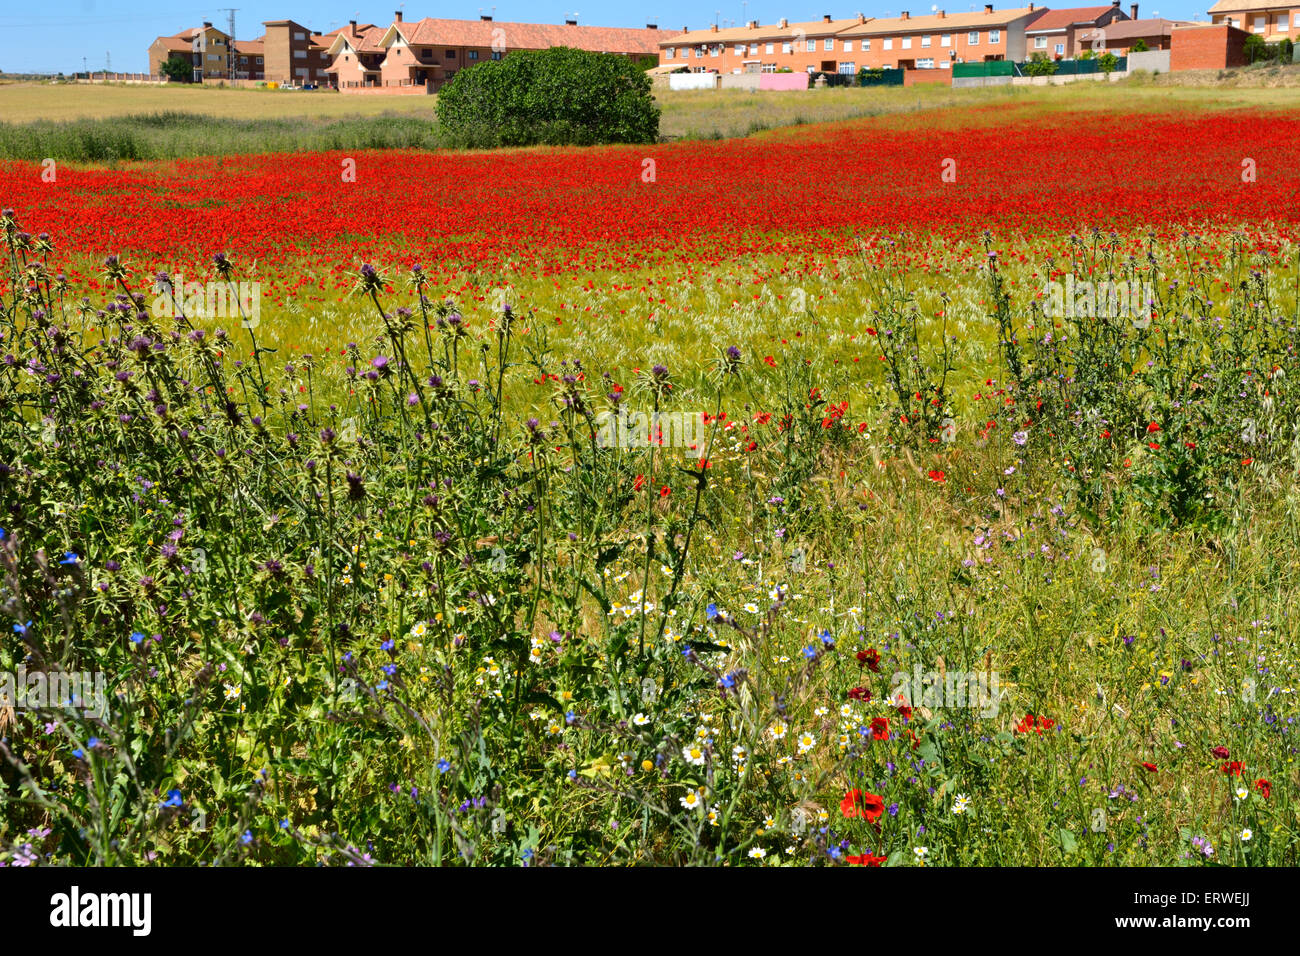 Wild flowers and red poppies in Spanish field by Cabanas de la Sagre near Toledo Stock Photo